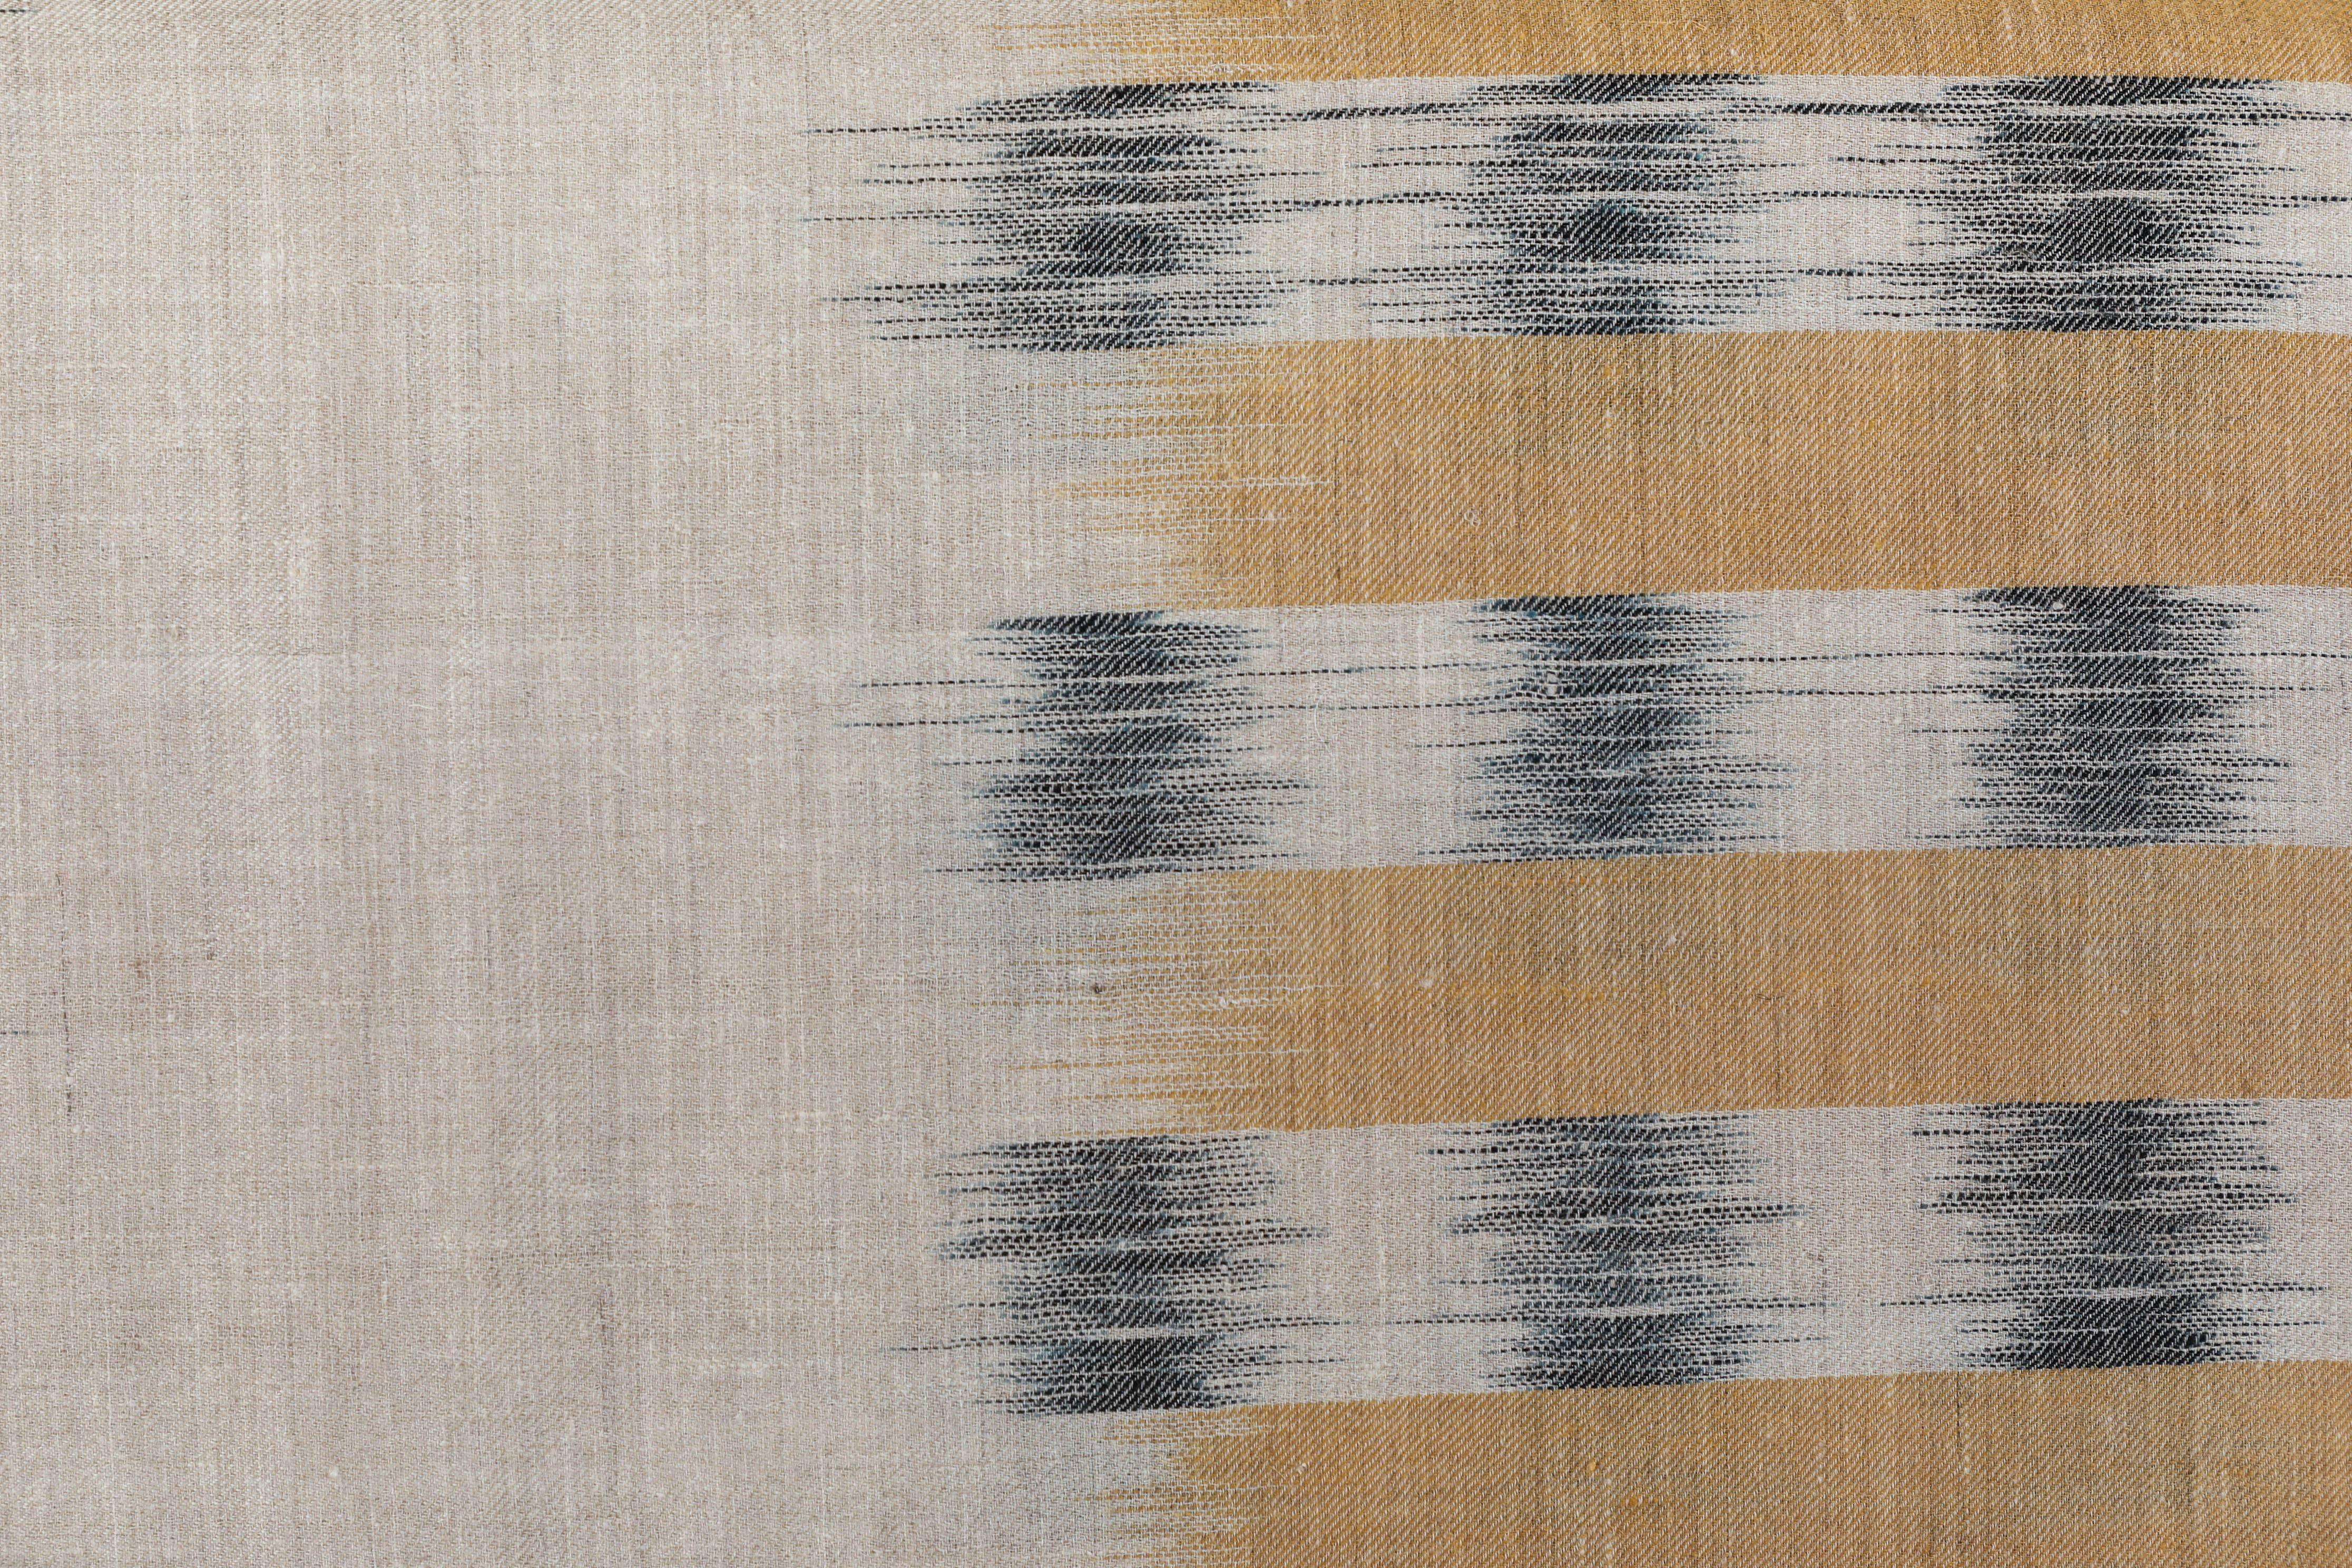 Contemporary Ikat Woven Cashmere Throw